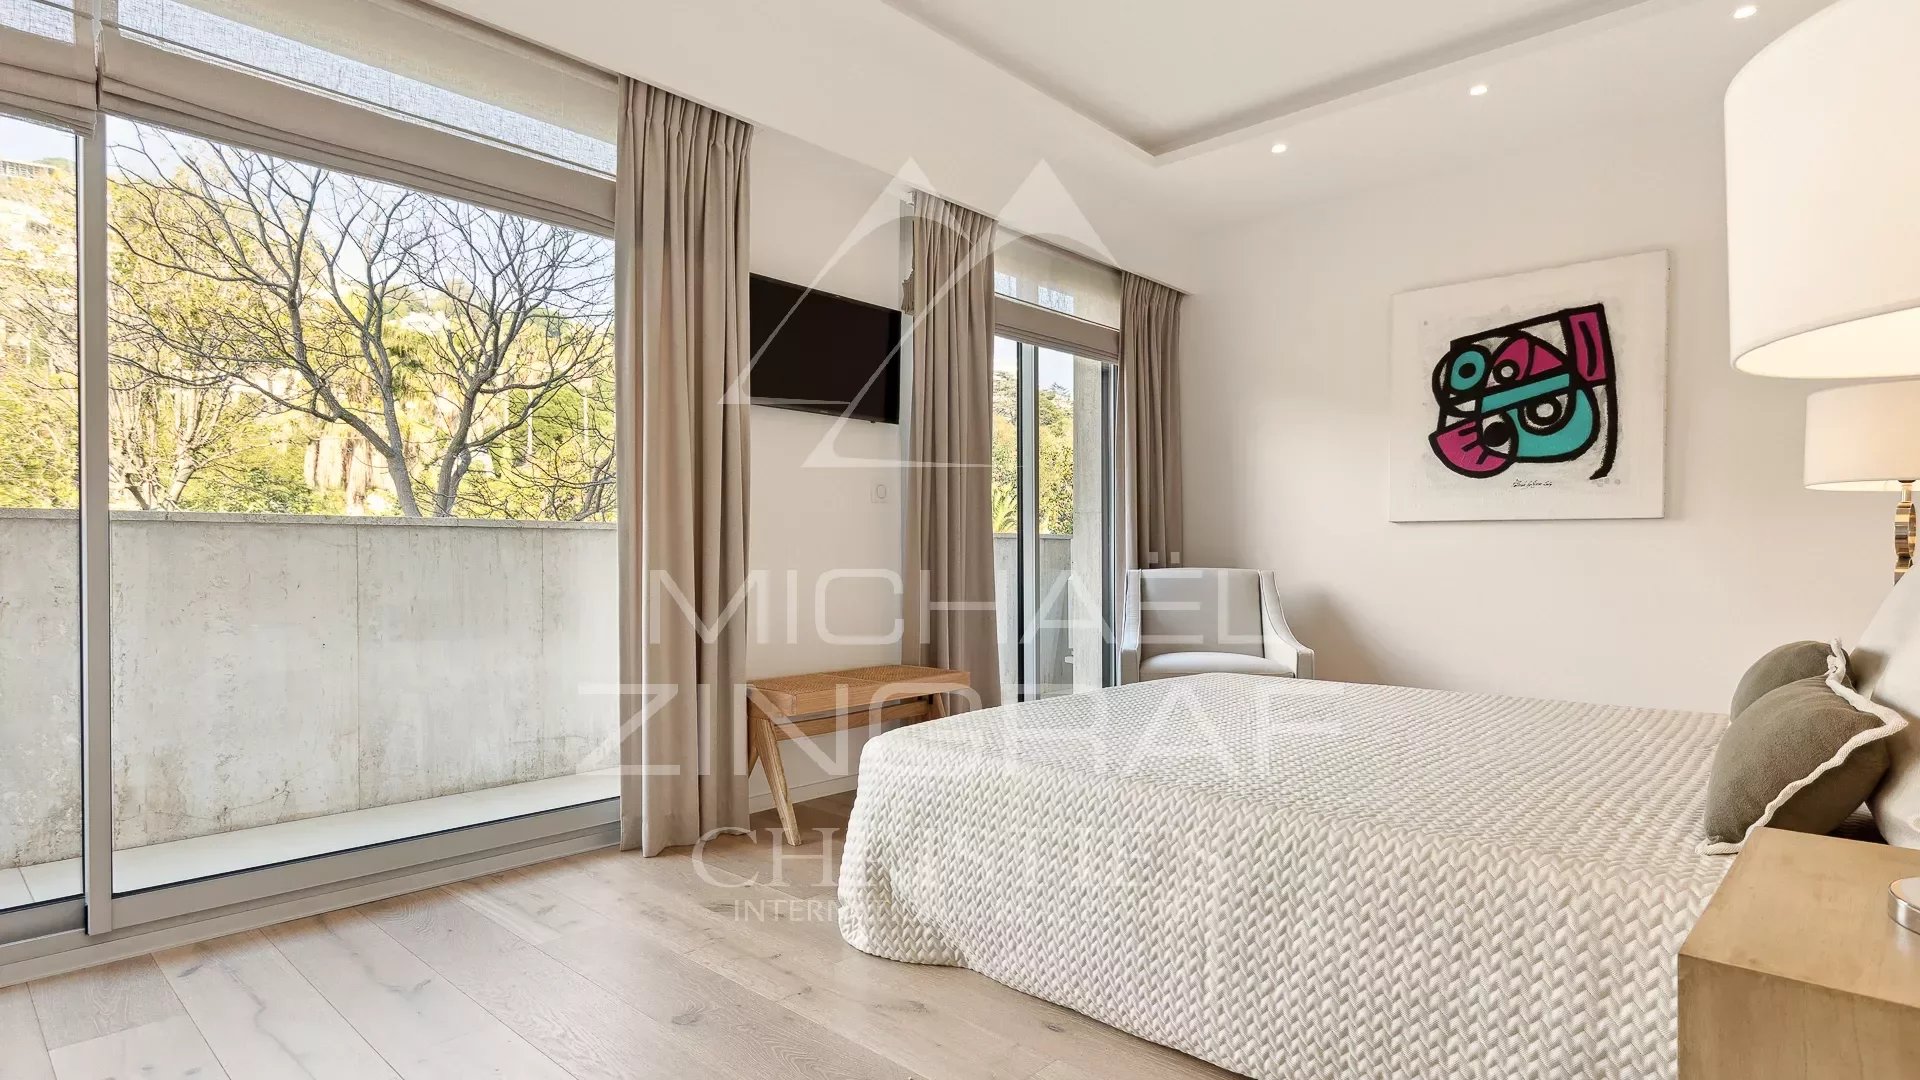 SOLE AGENT  Superb contemporary 4 room apartment in perfect condition